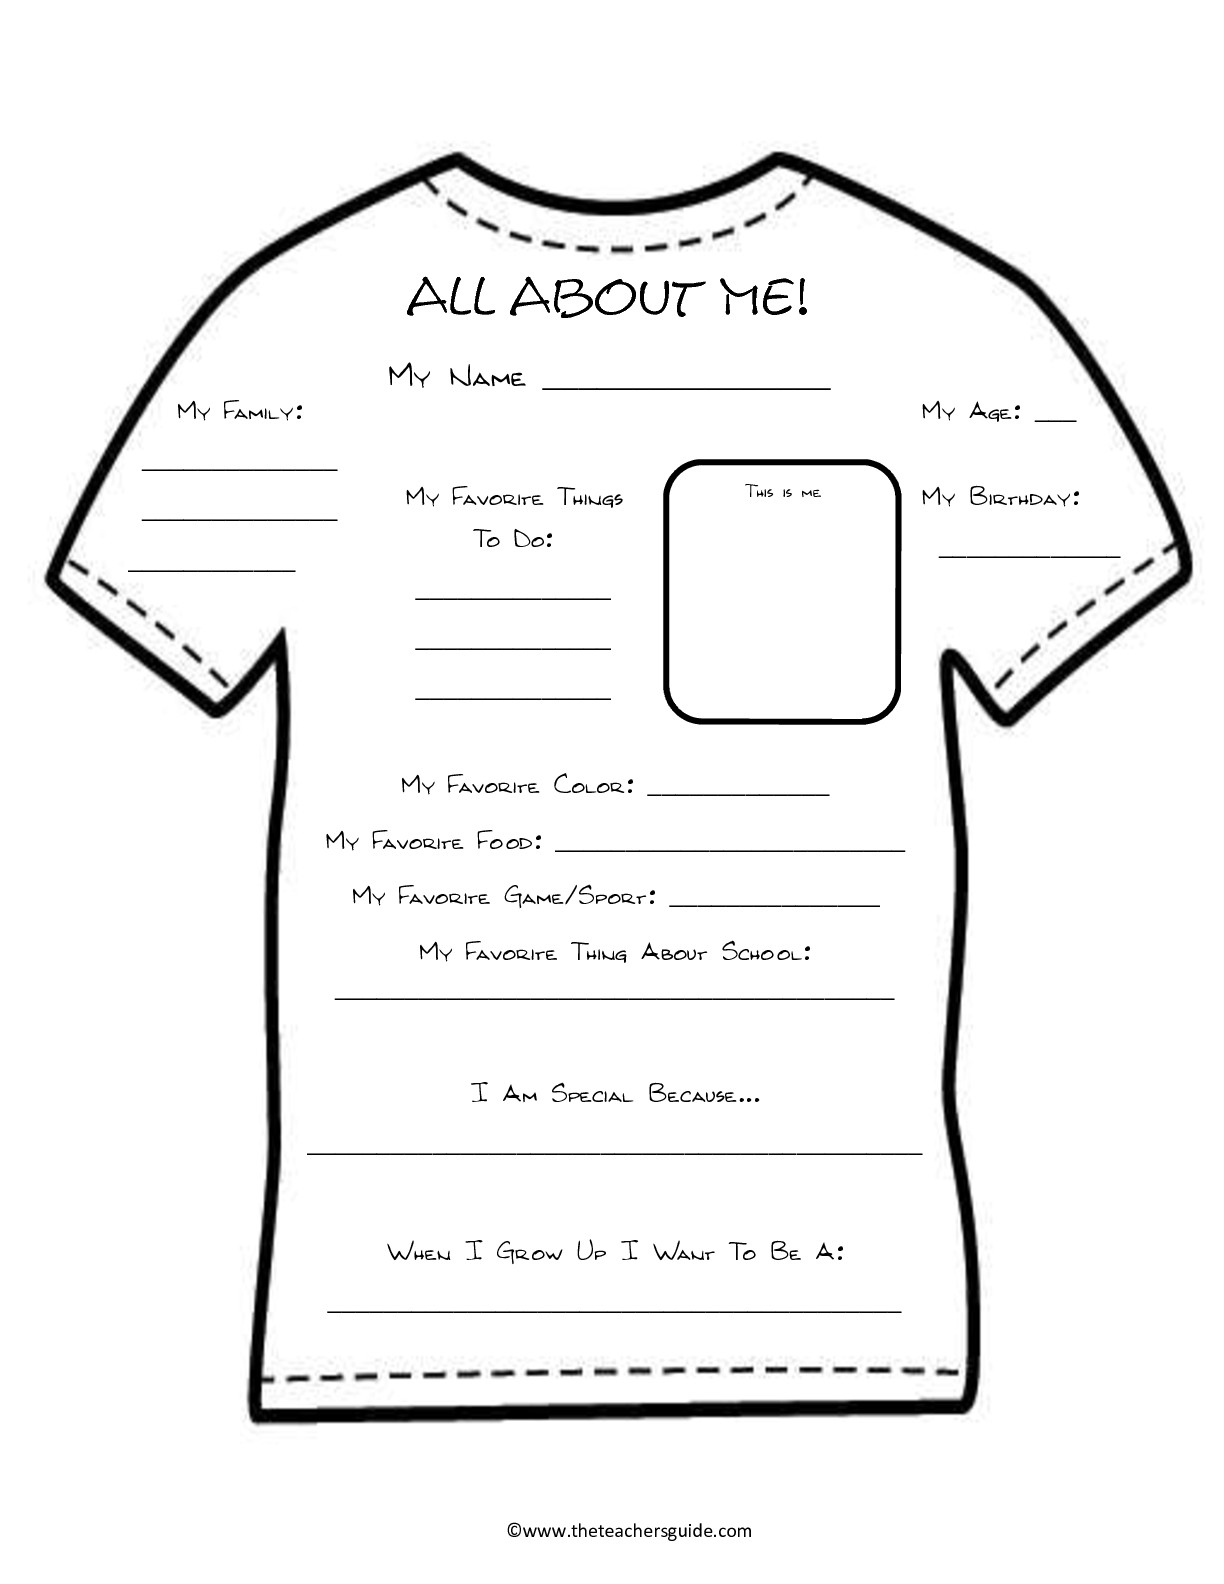 13-best-images-of-what-i-like-about-me-worksheet-all-about-me-template-worksheet-all-about-me